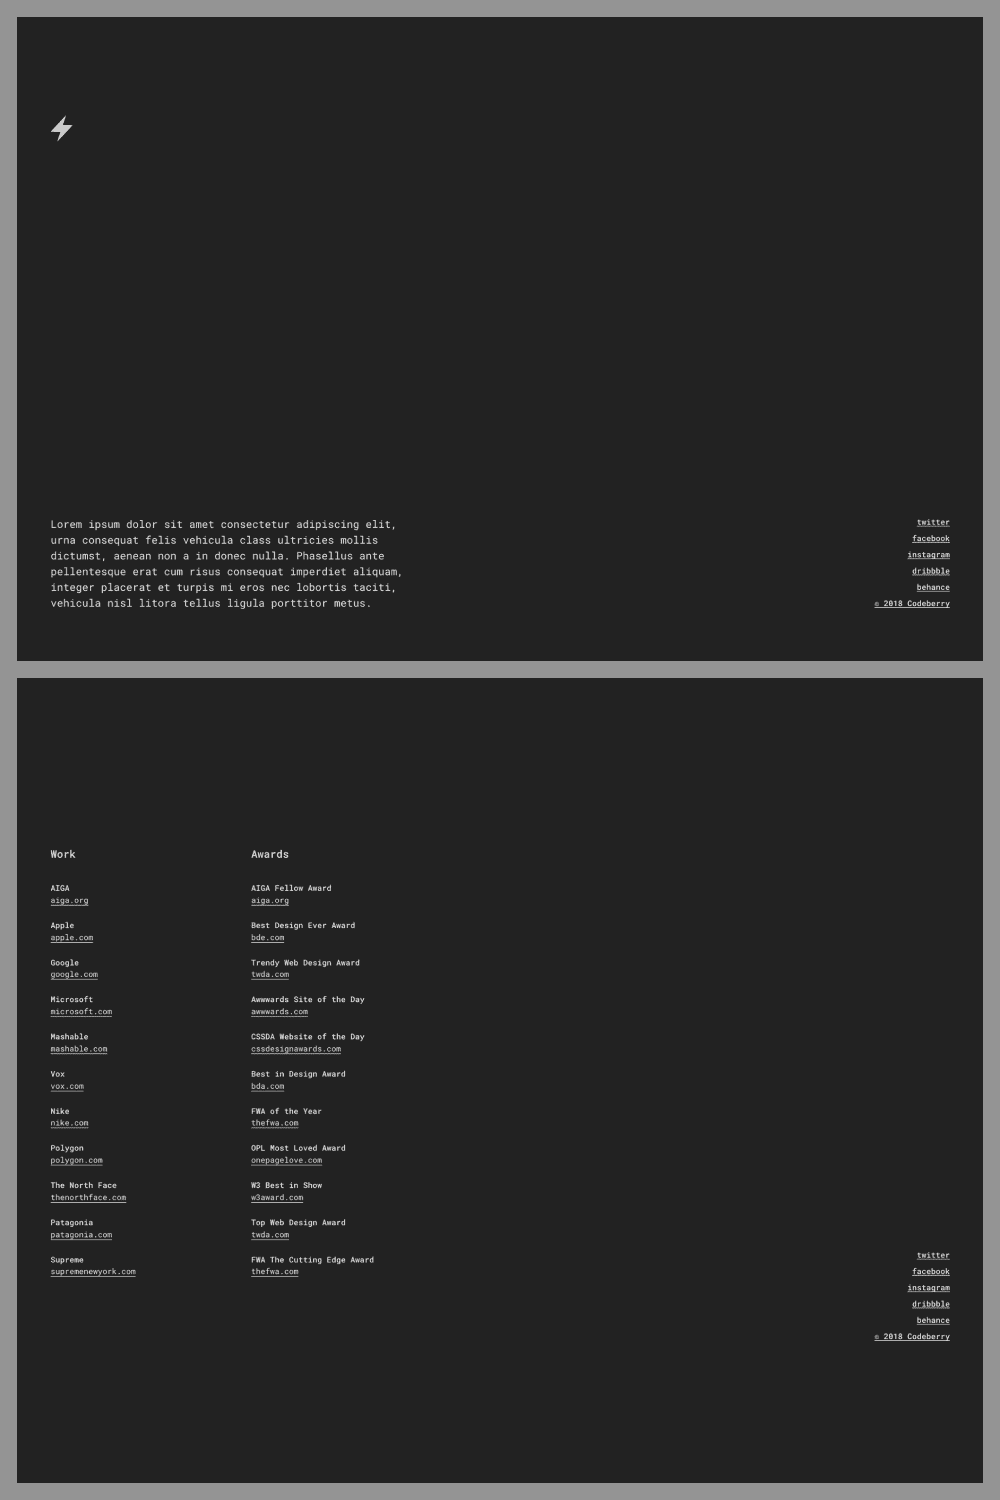 Landing Page with Typewritter Text on Black Background.